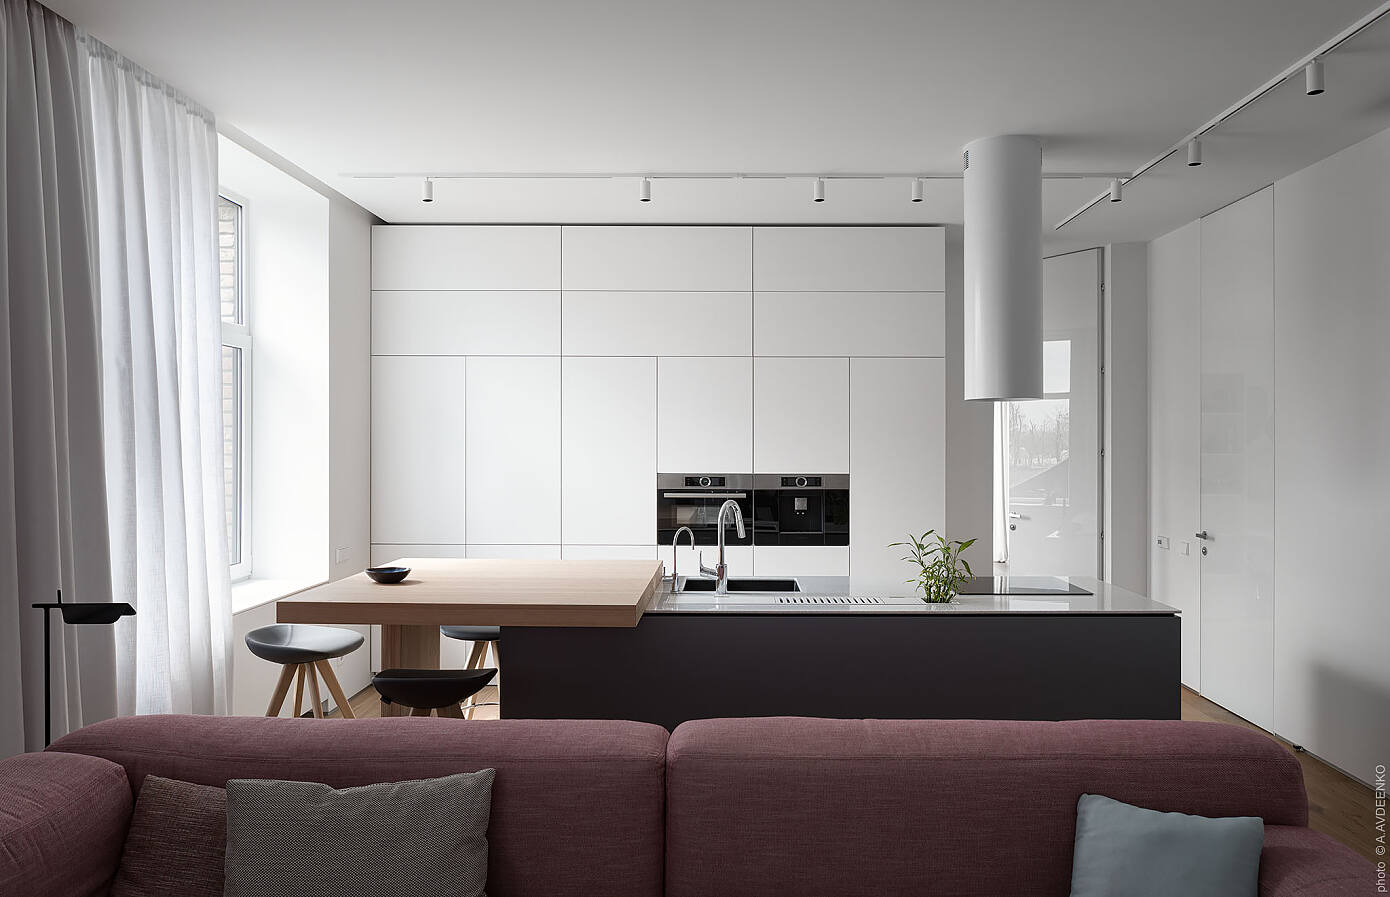 Apartment in Dnipro by Valentirov & Partners